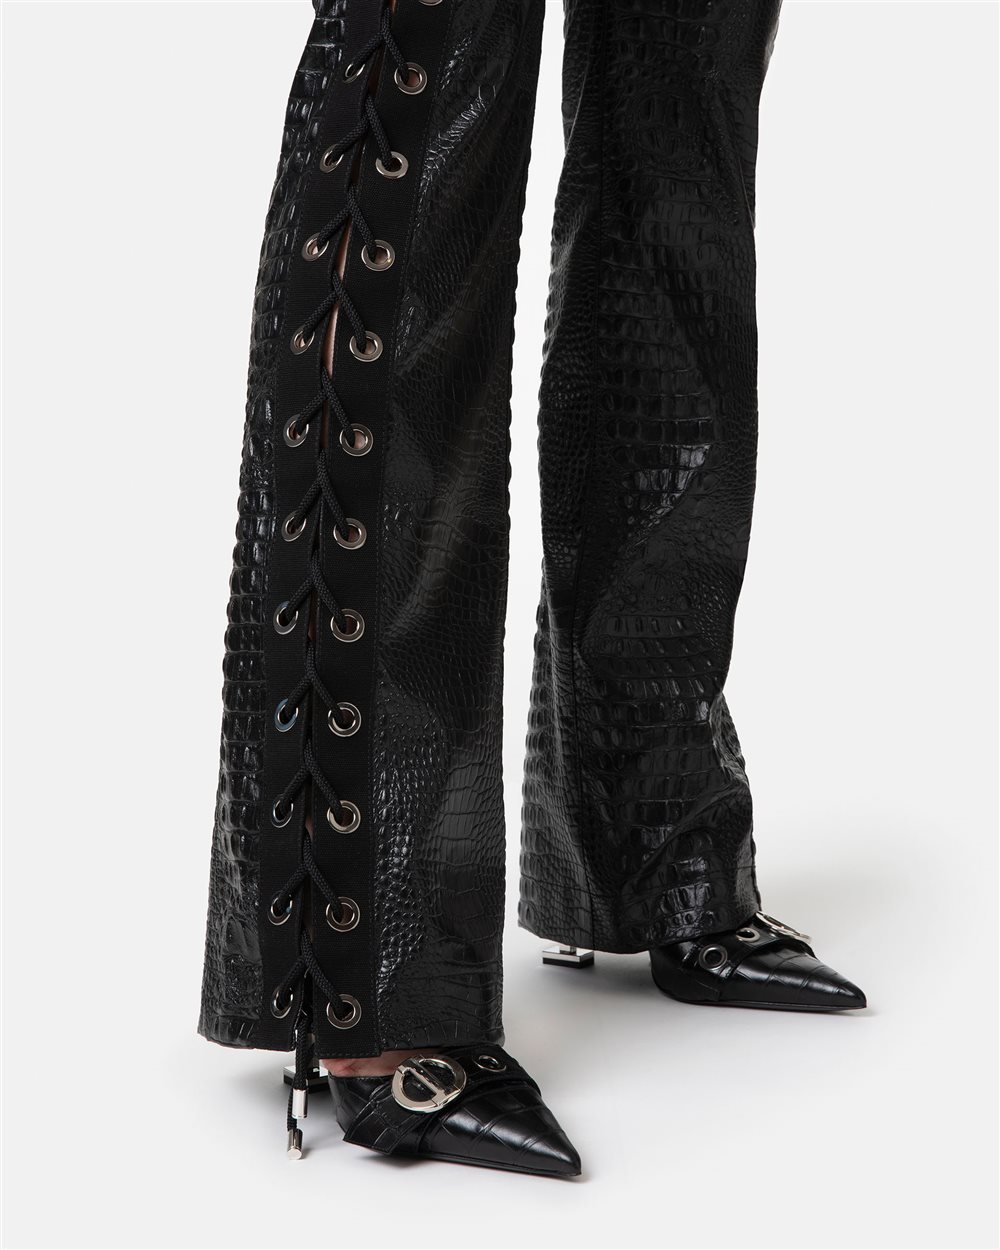 Trousers with fashion detail - Iceberg - Official Website